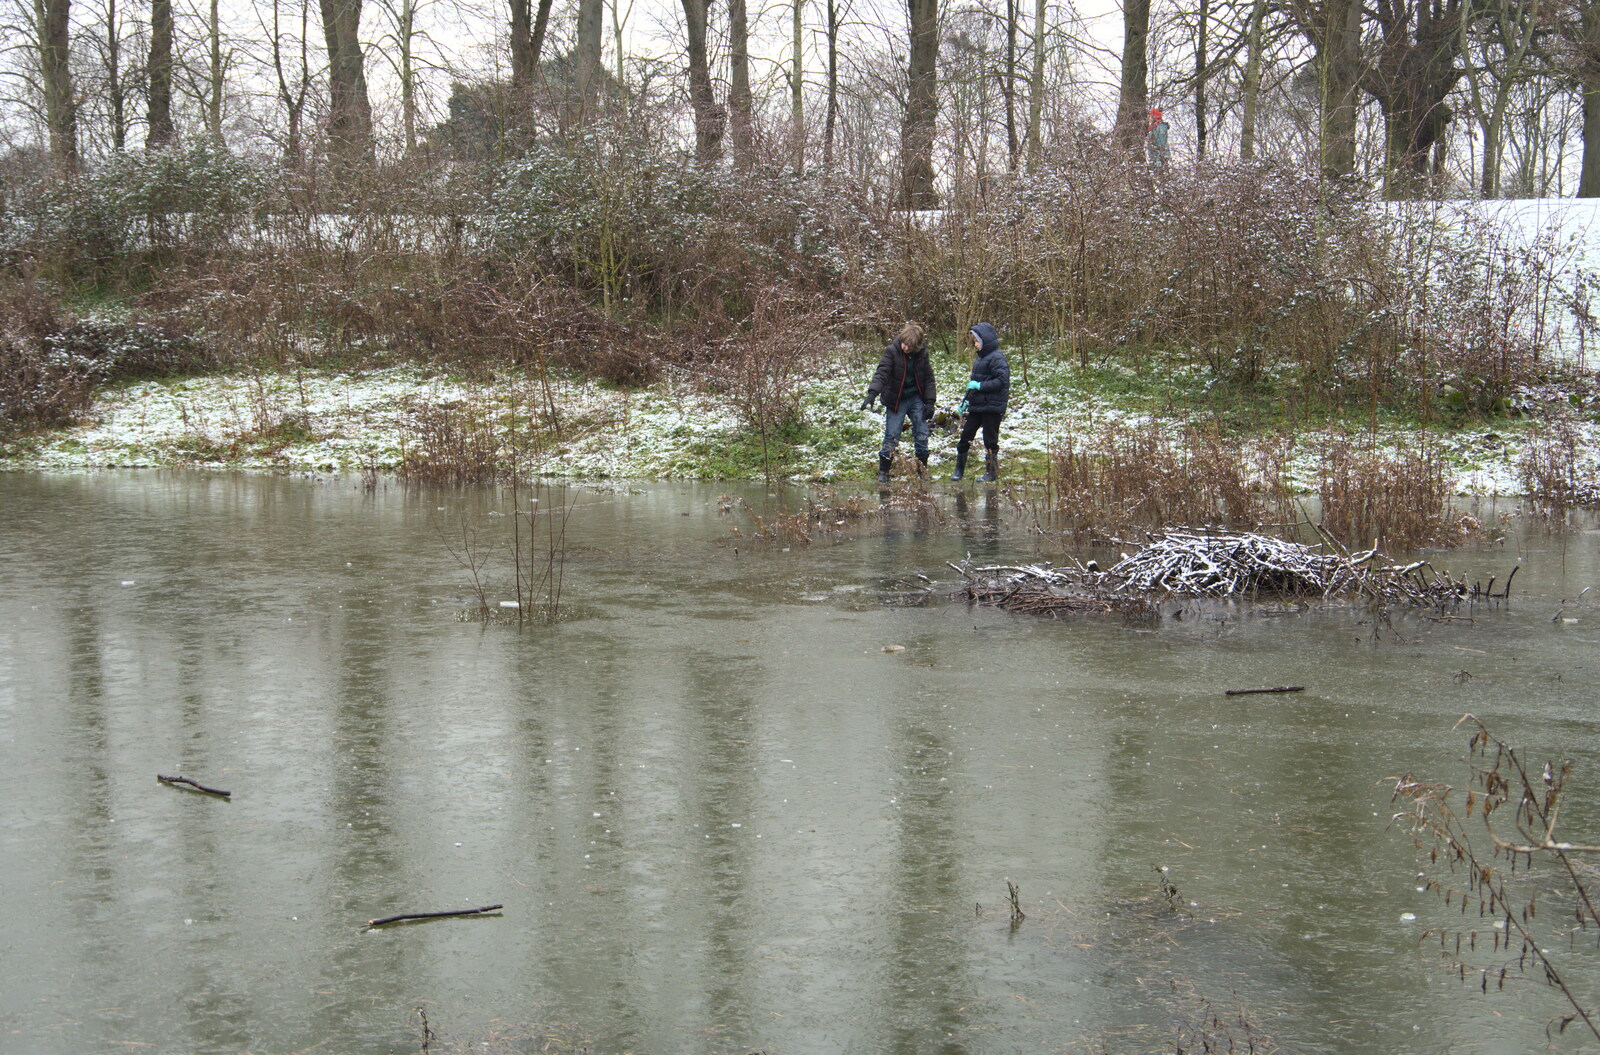 The boys by the frozen pond from Winter Lockdown Walks, Thrandeston and Brome, Suffolk - 24th January 2021